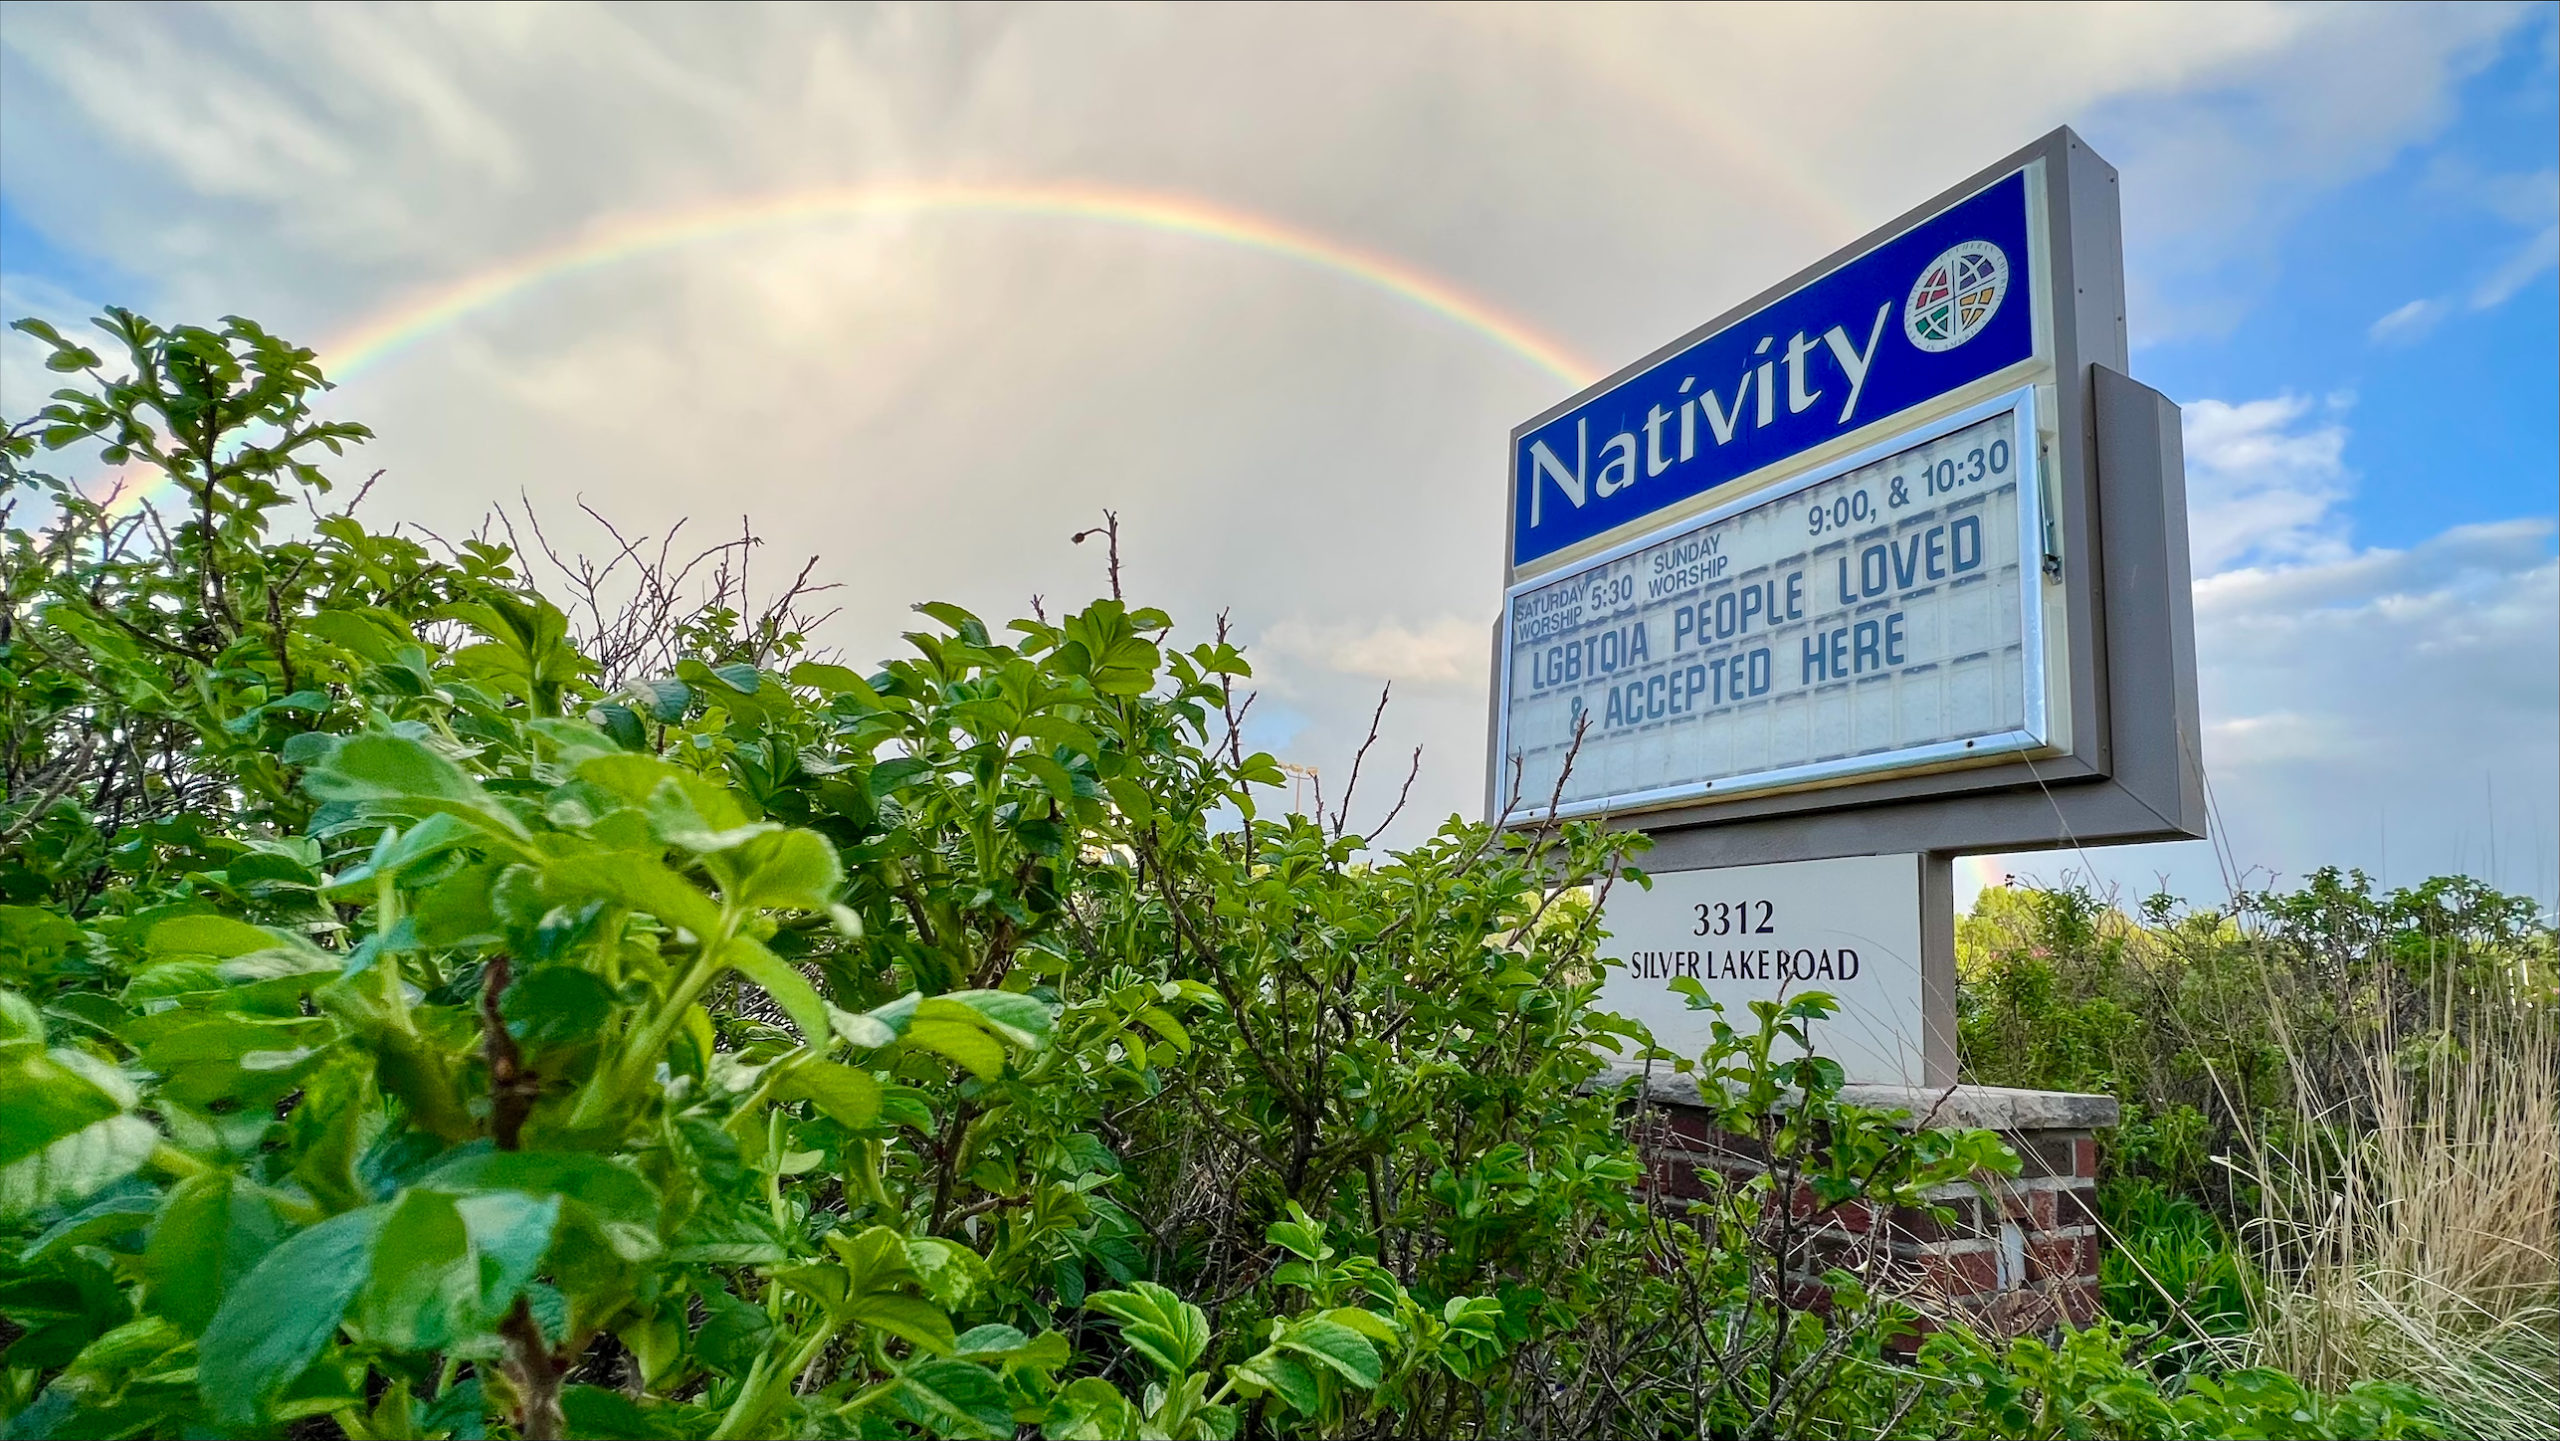 A rainbow in the sky goes over the Nativity Lutheran Church sign that says LGBTQIA people loved and accepted here